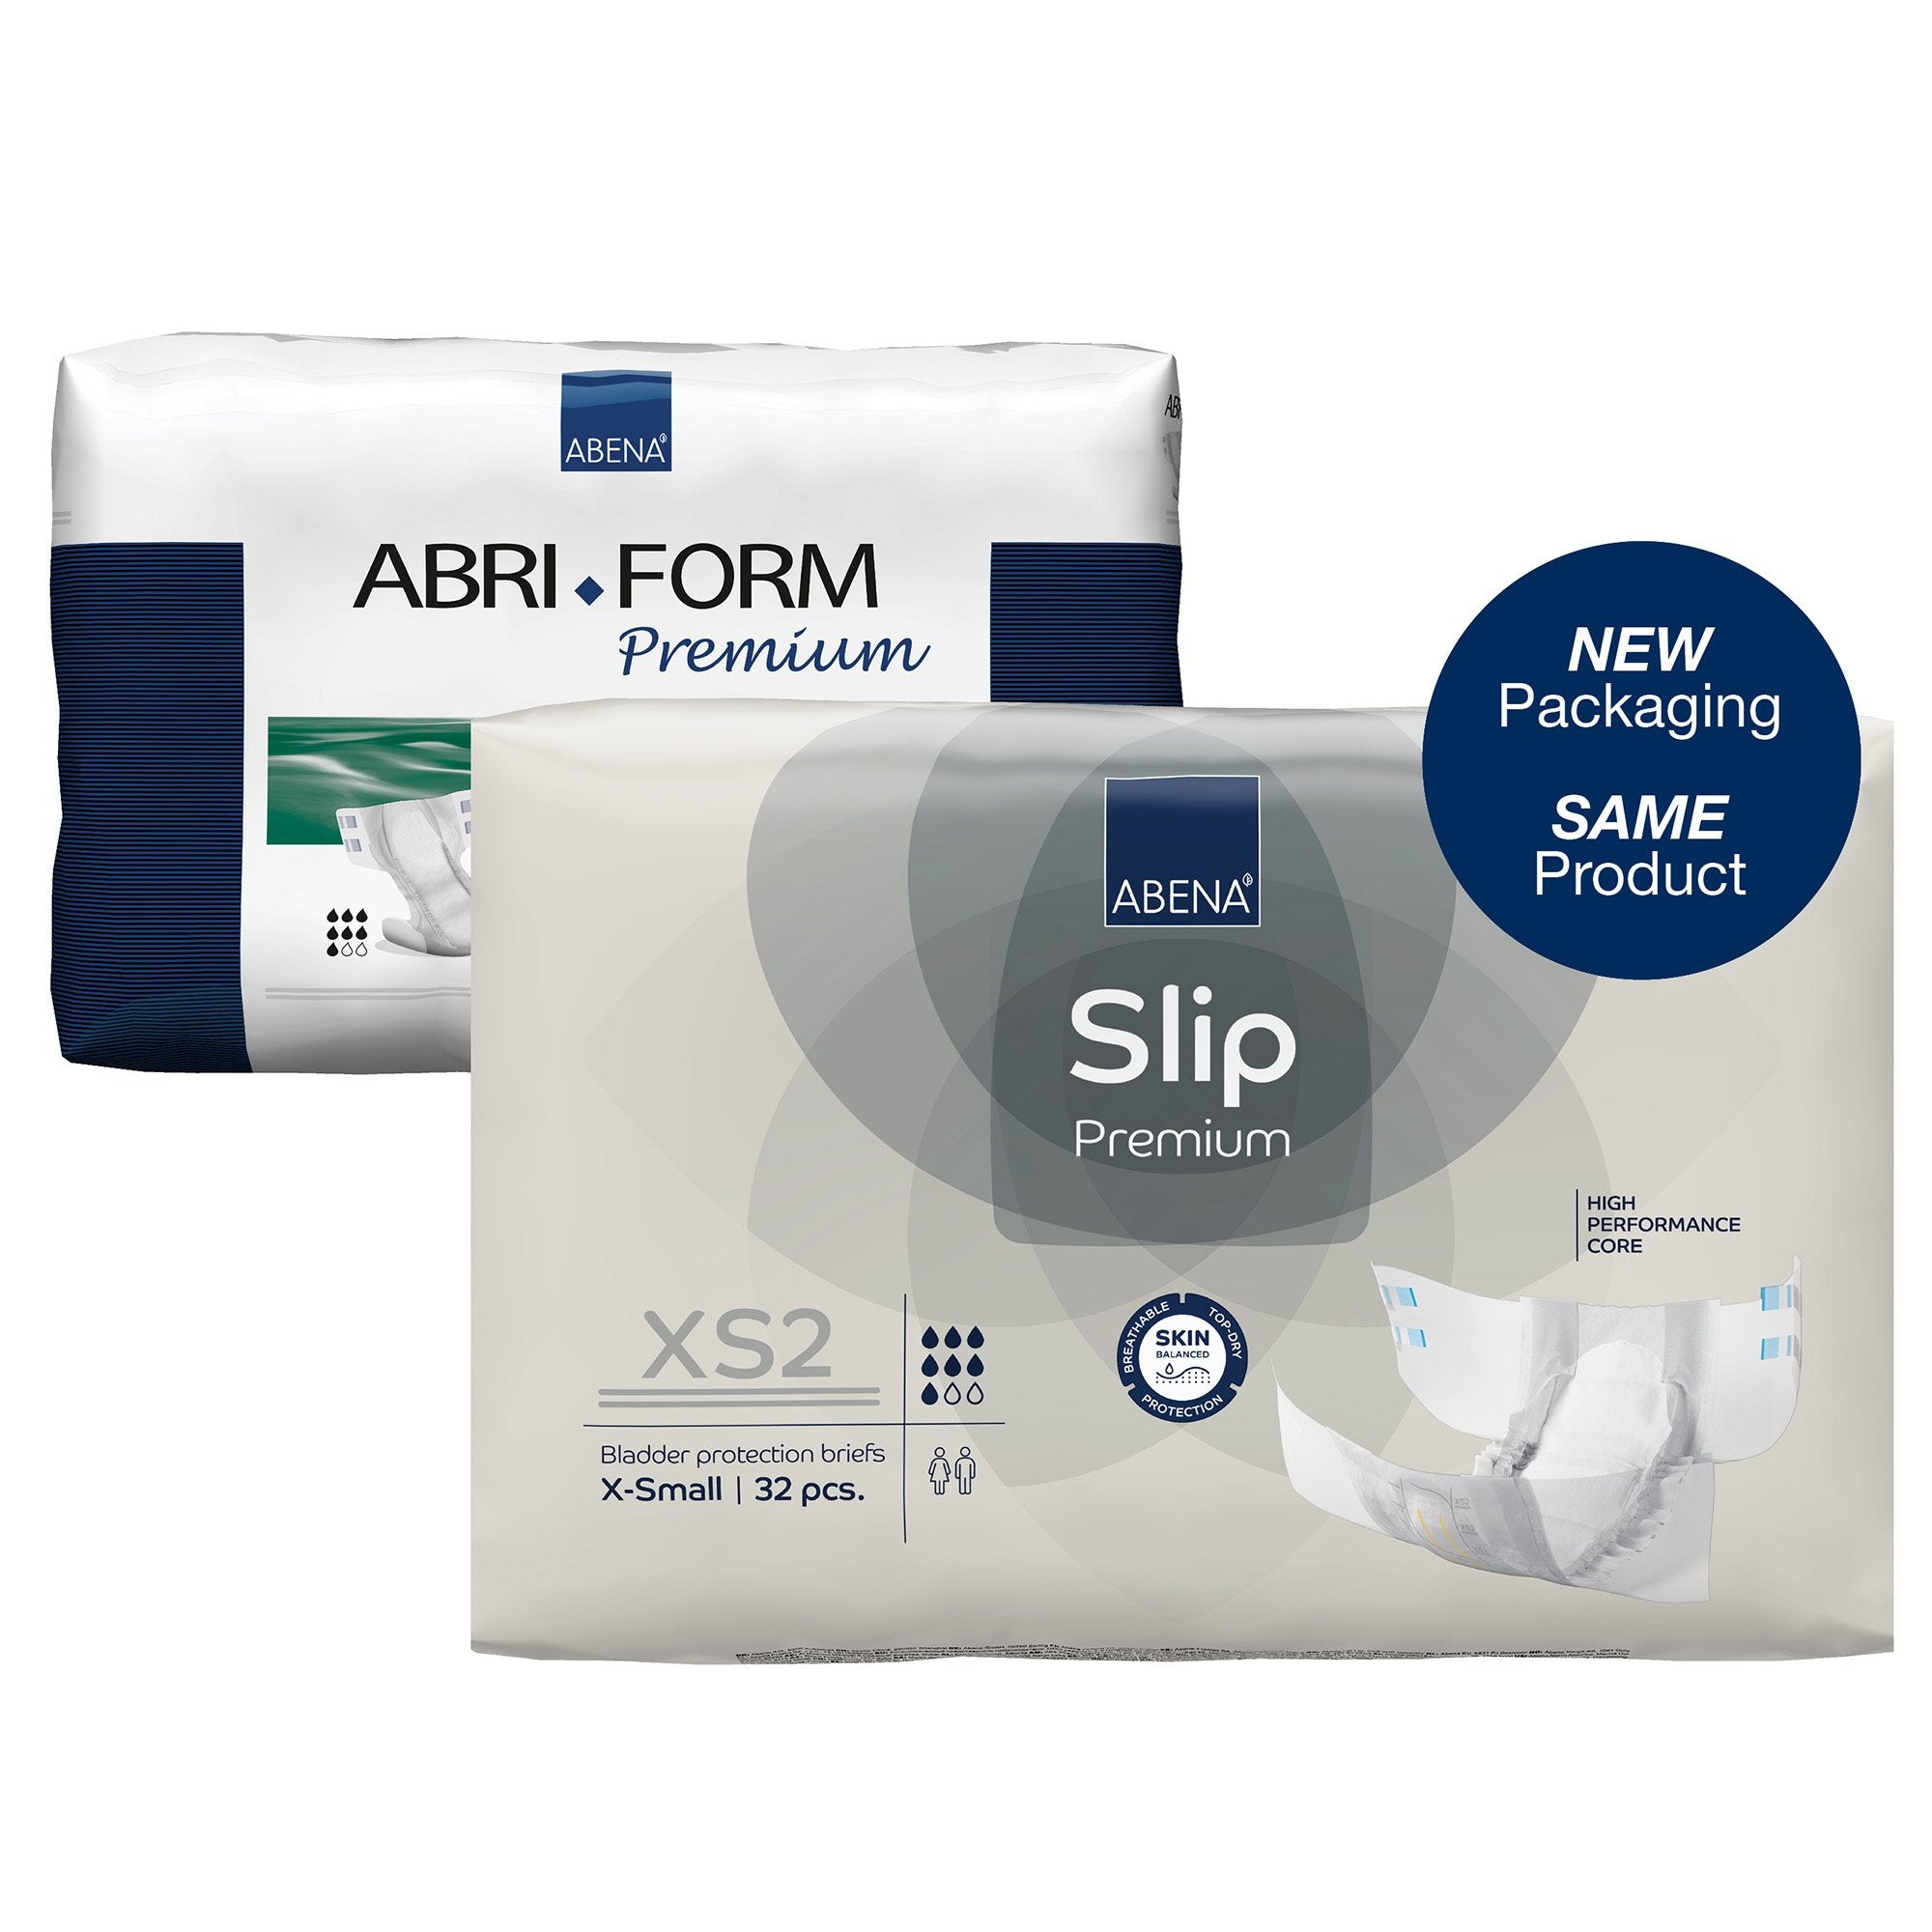 Unisex Adult Incontinence Brief Abena® Slip Premium XS2 X-Small Disposable Heavy Absorbency